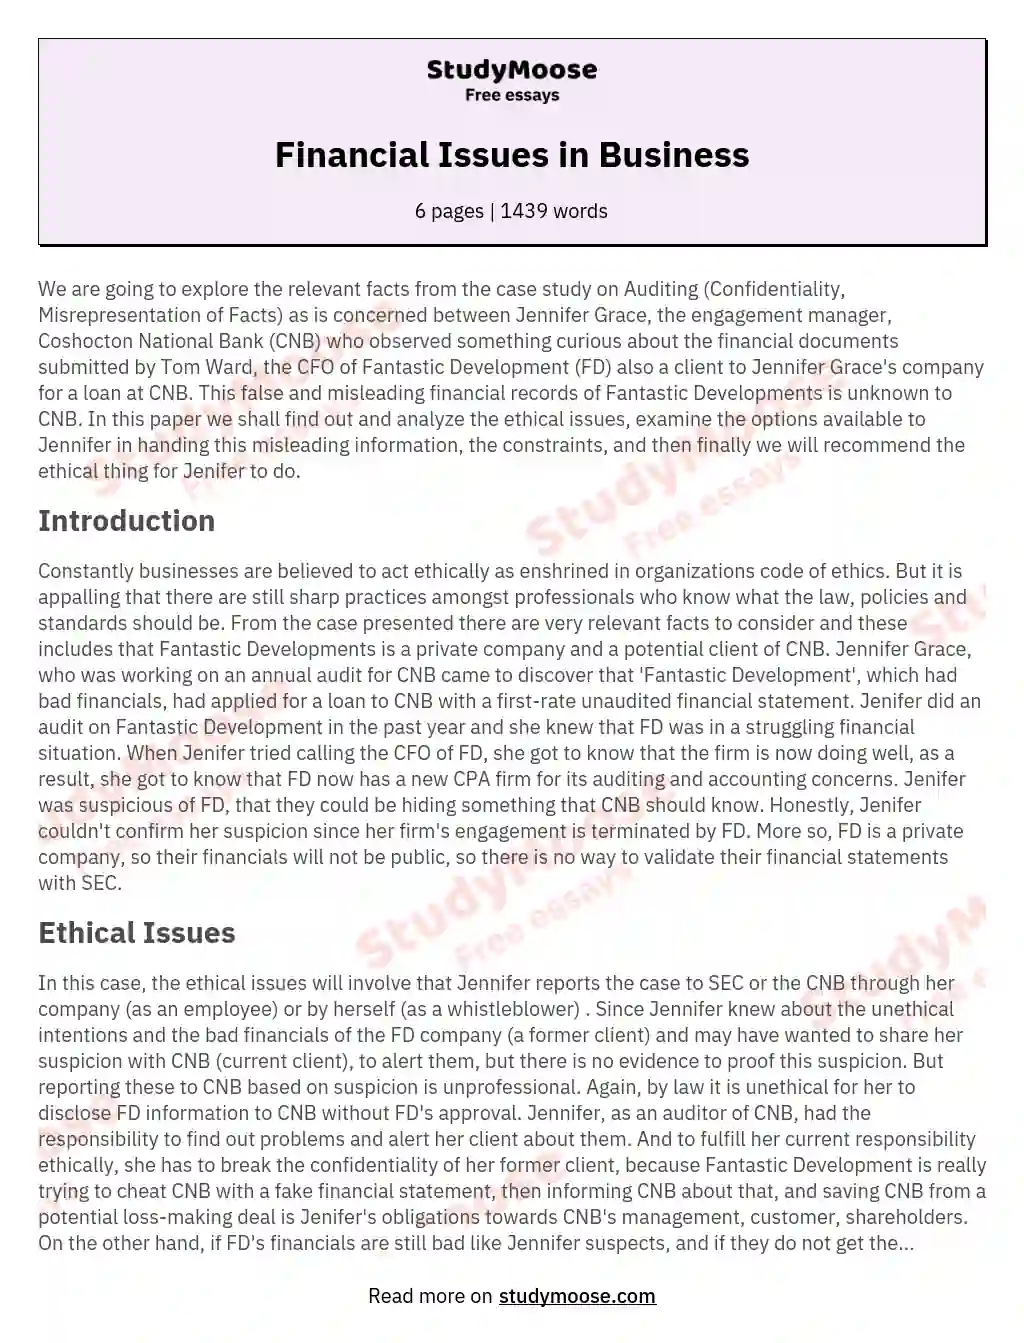 Financial Issues in Business essay